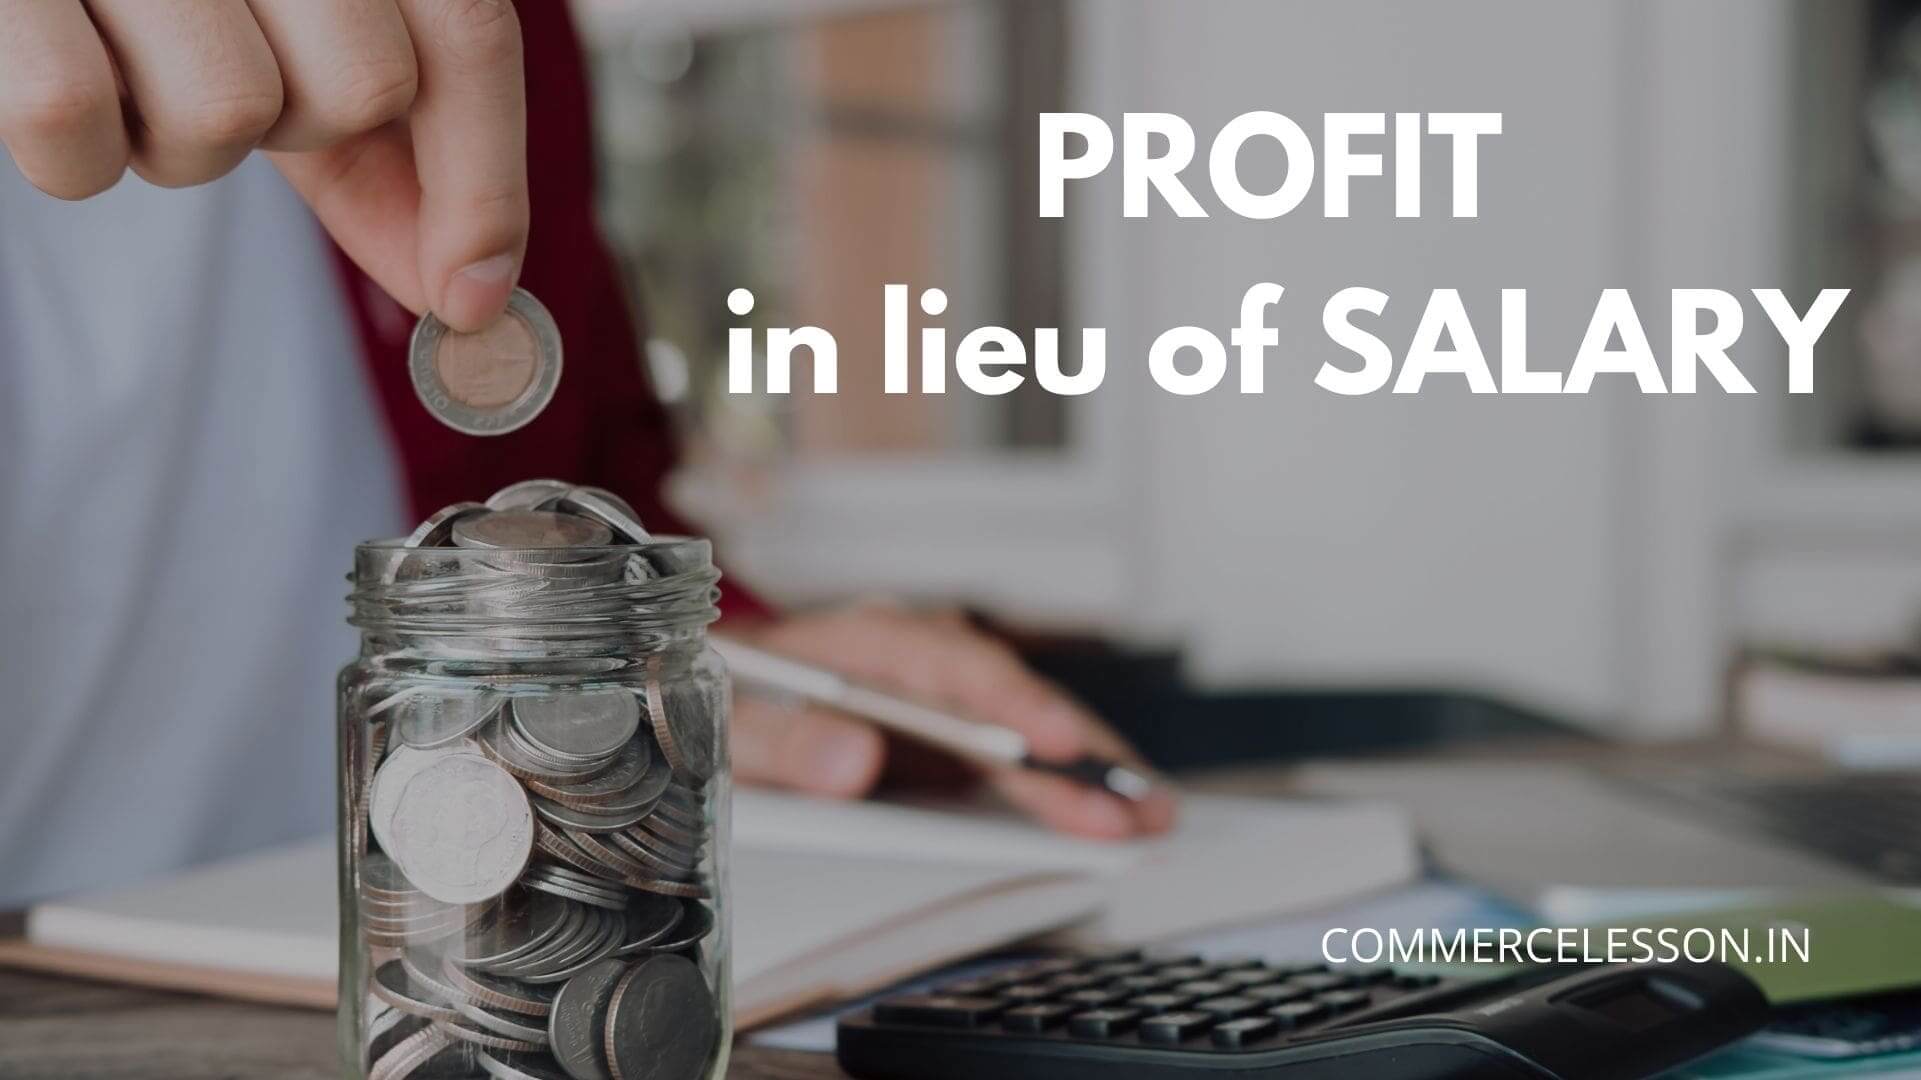 Profits in lieu of salary - CommerceLesson.in